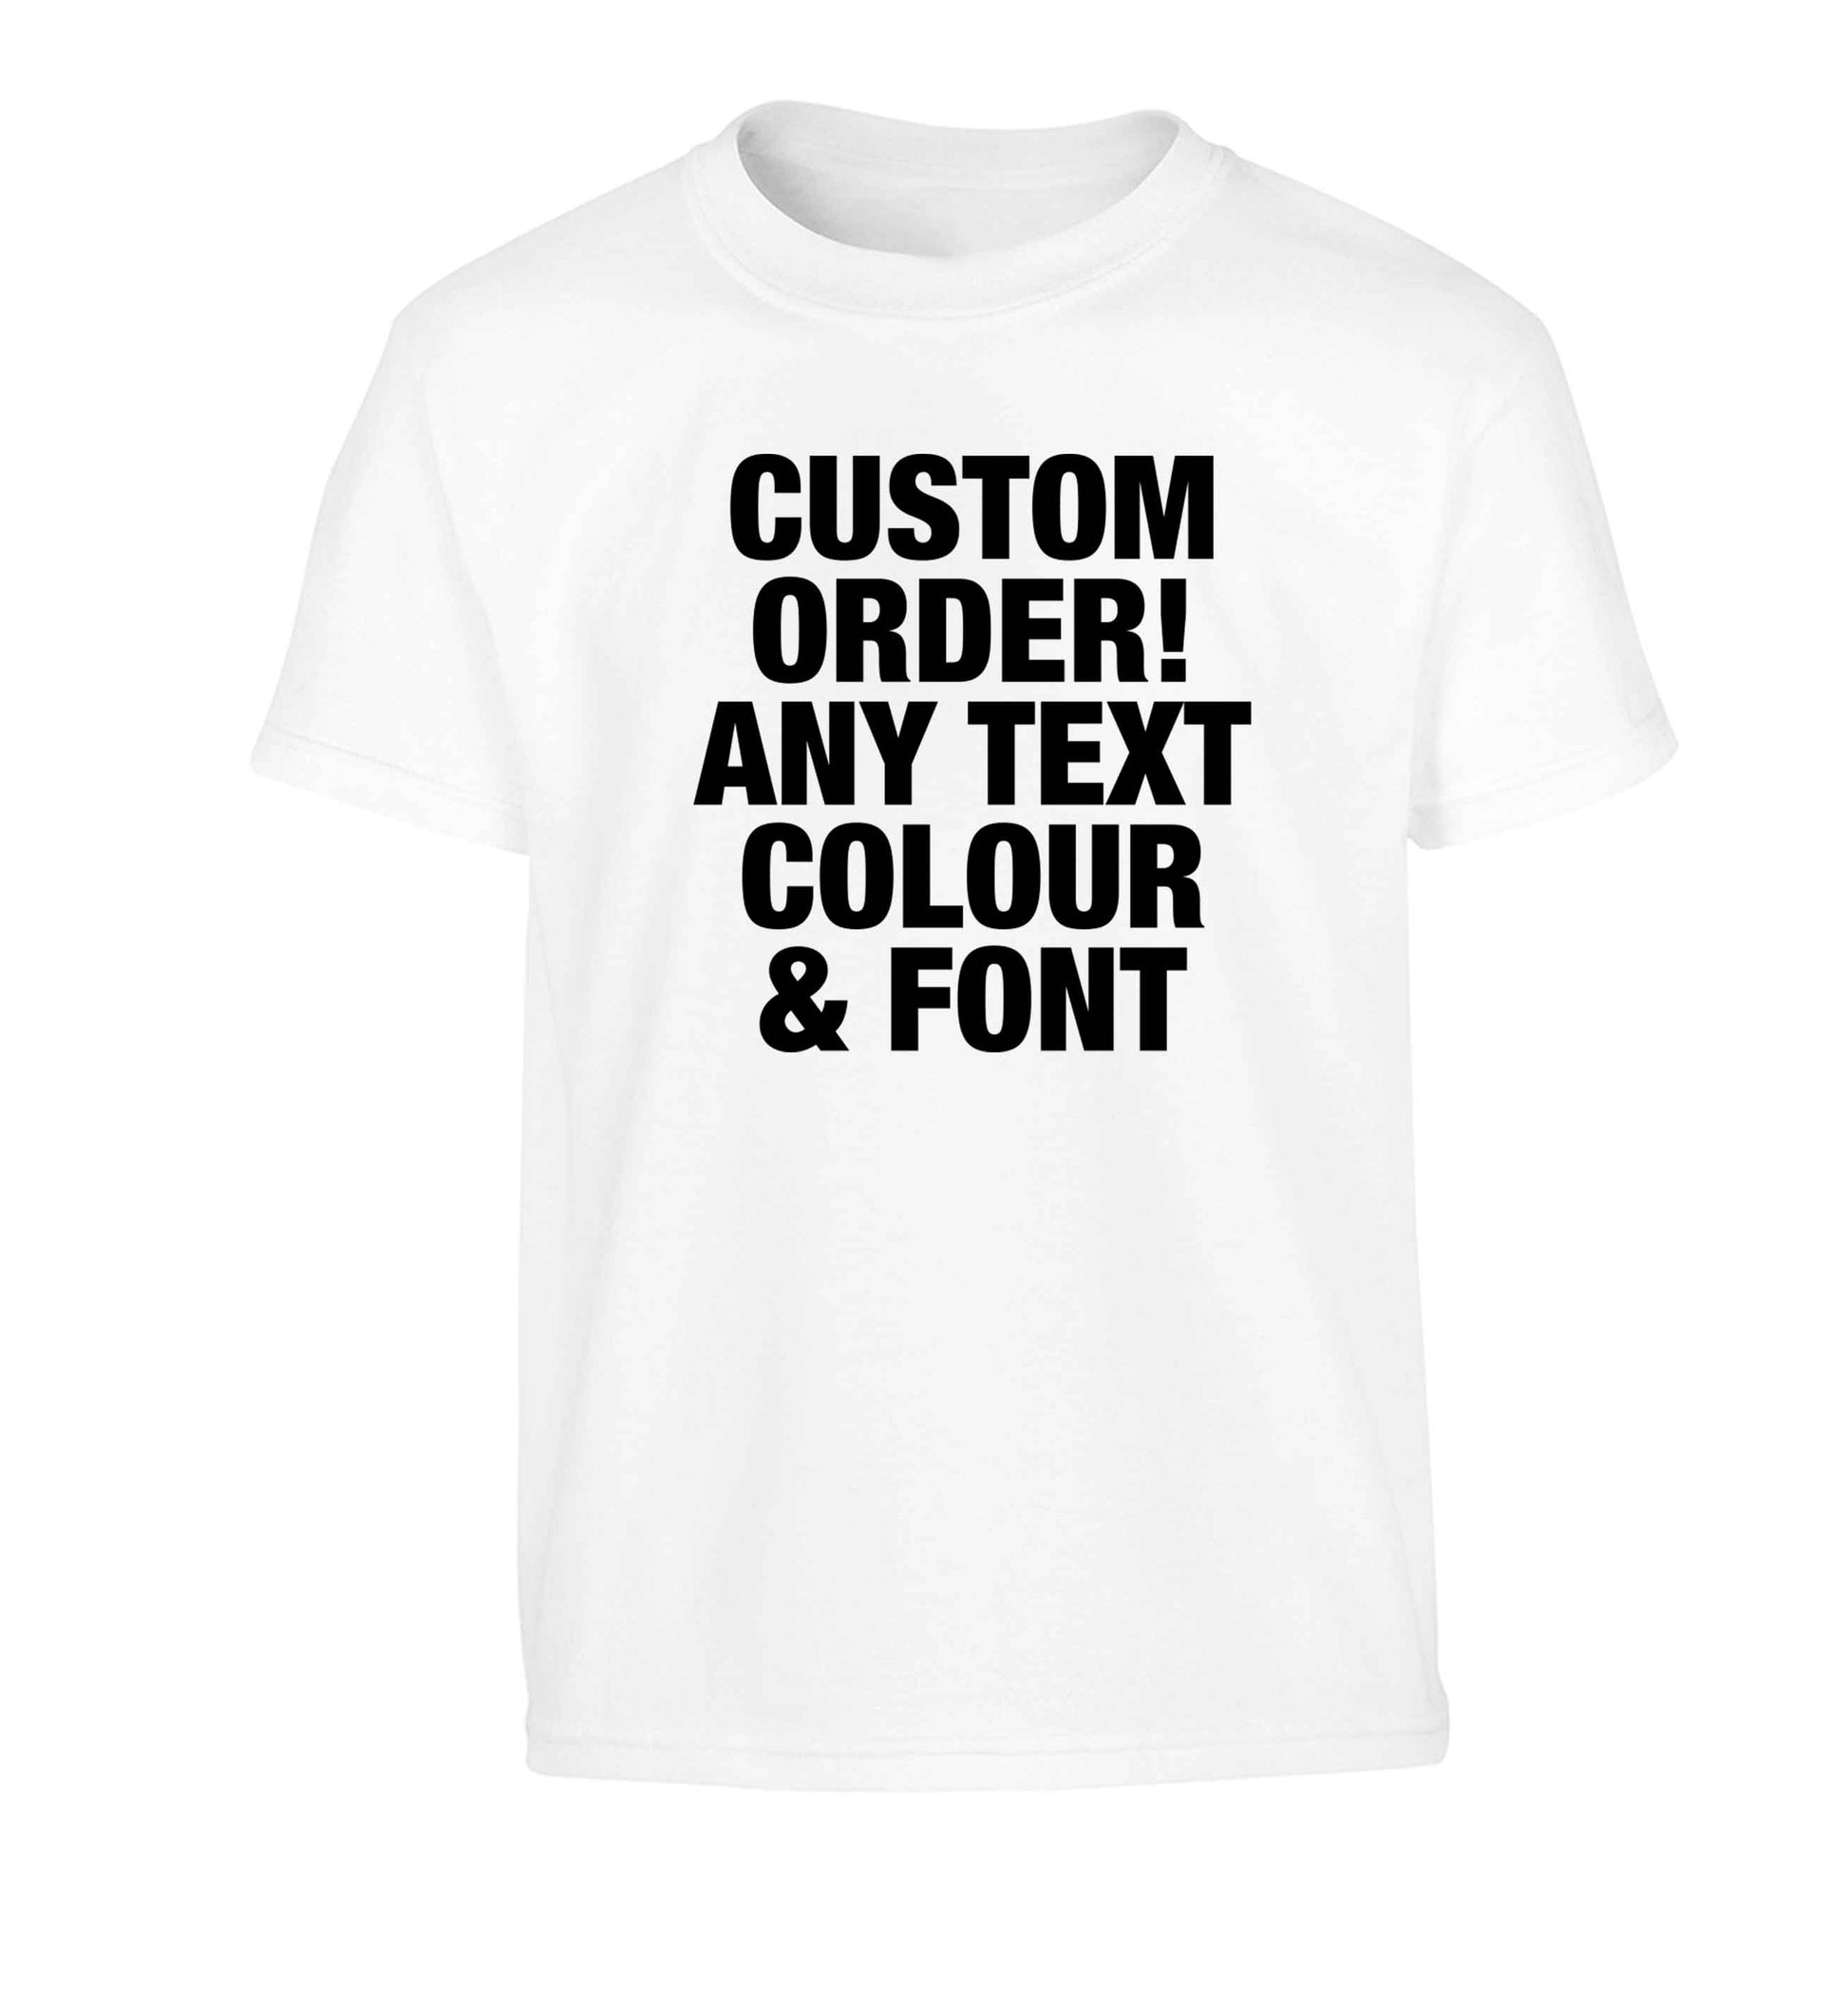 Custom order any text colour and font Children's white Tshirt 12-13 Years